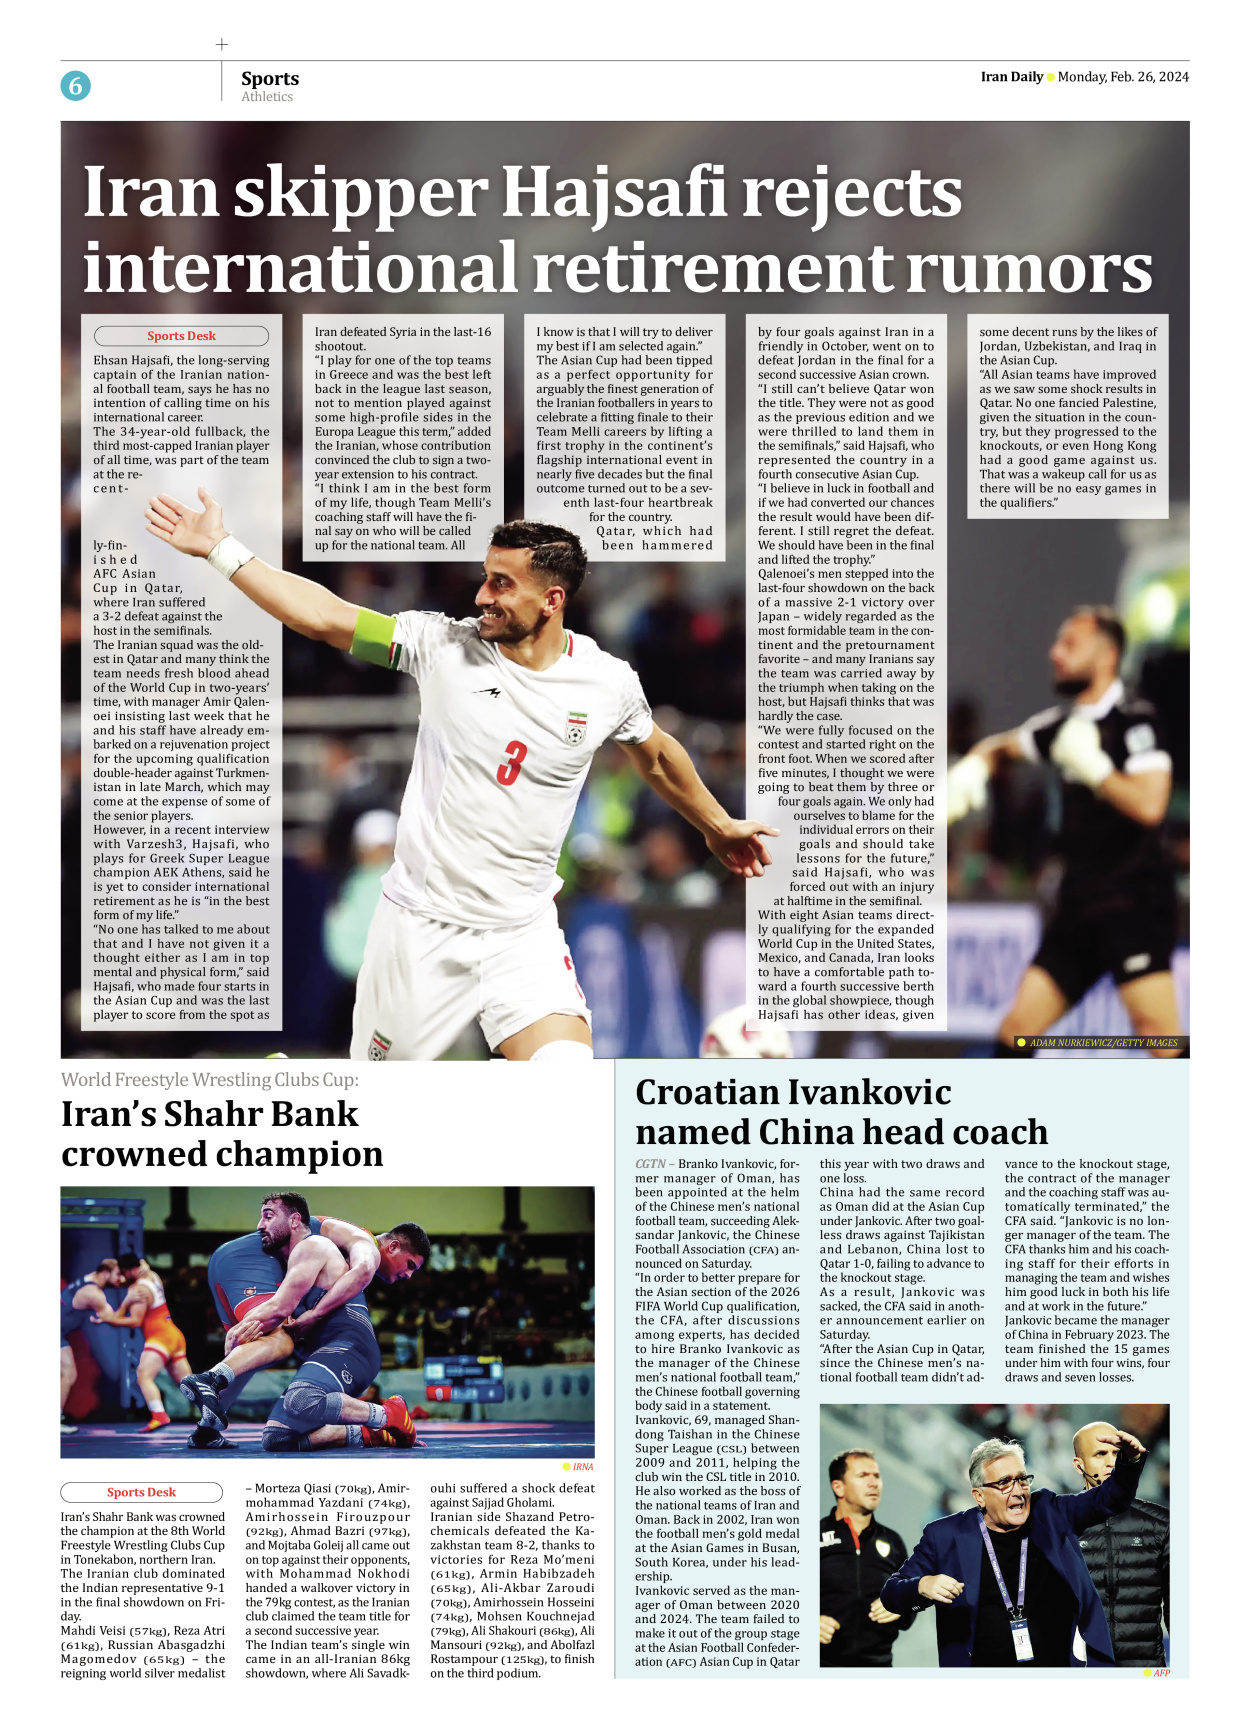 Iran Daily - Number Seven Thousand Five Hundred and Fifteen - 26 February 2024 - Page 6